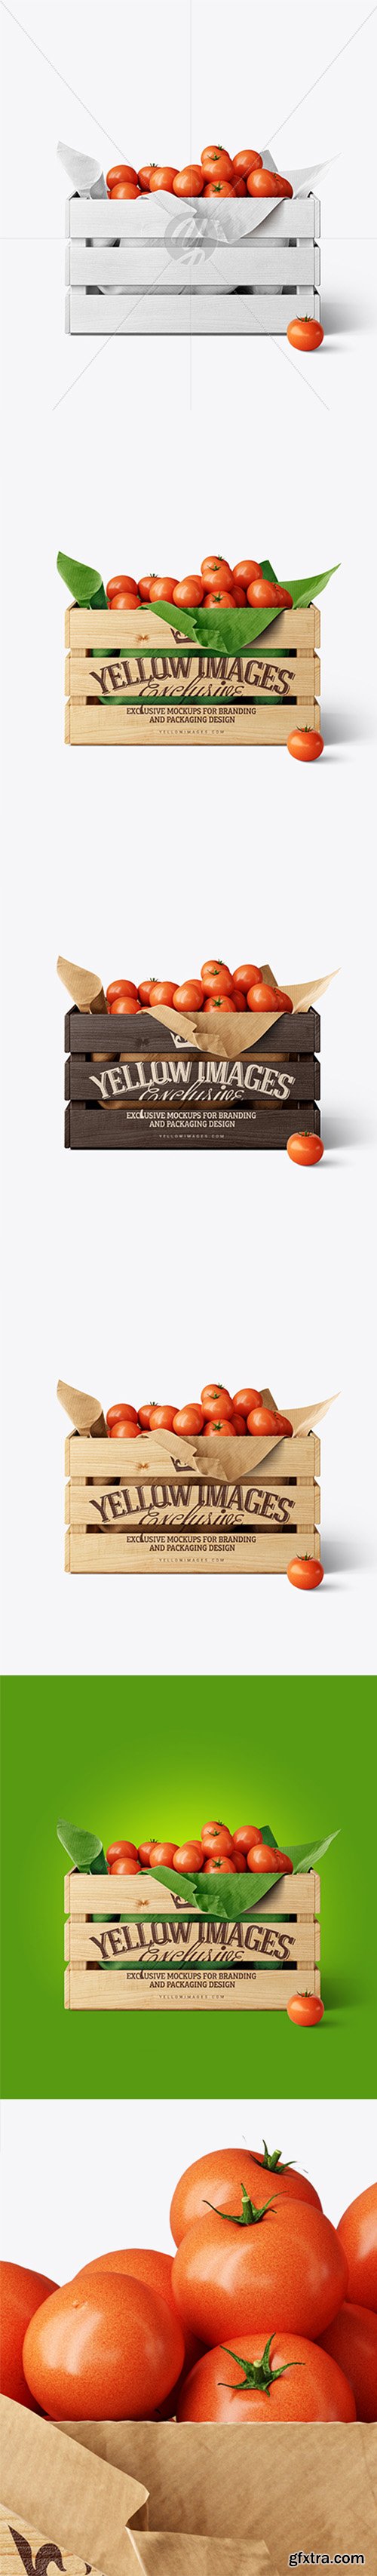 Wooden Crate With Tomatoes Mockup 30349